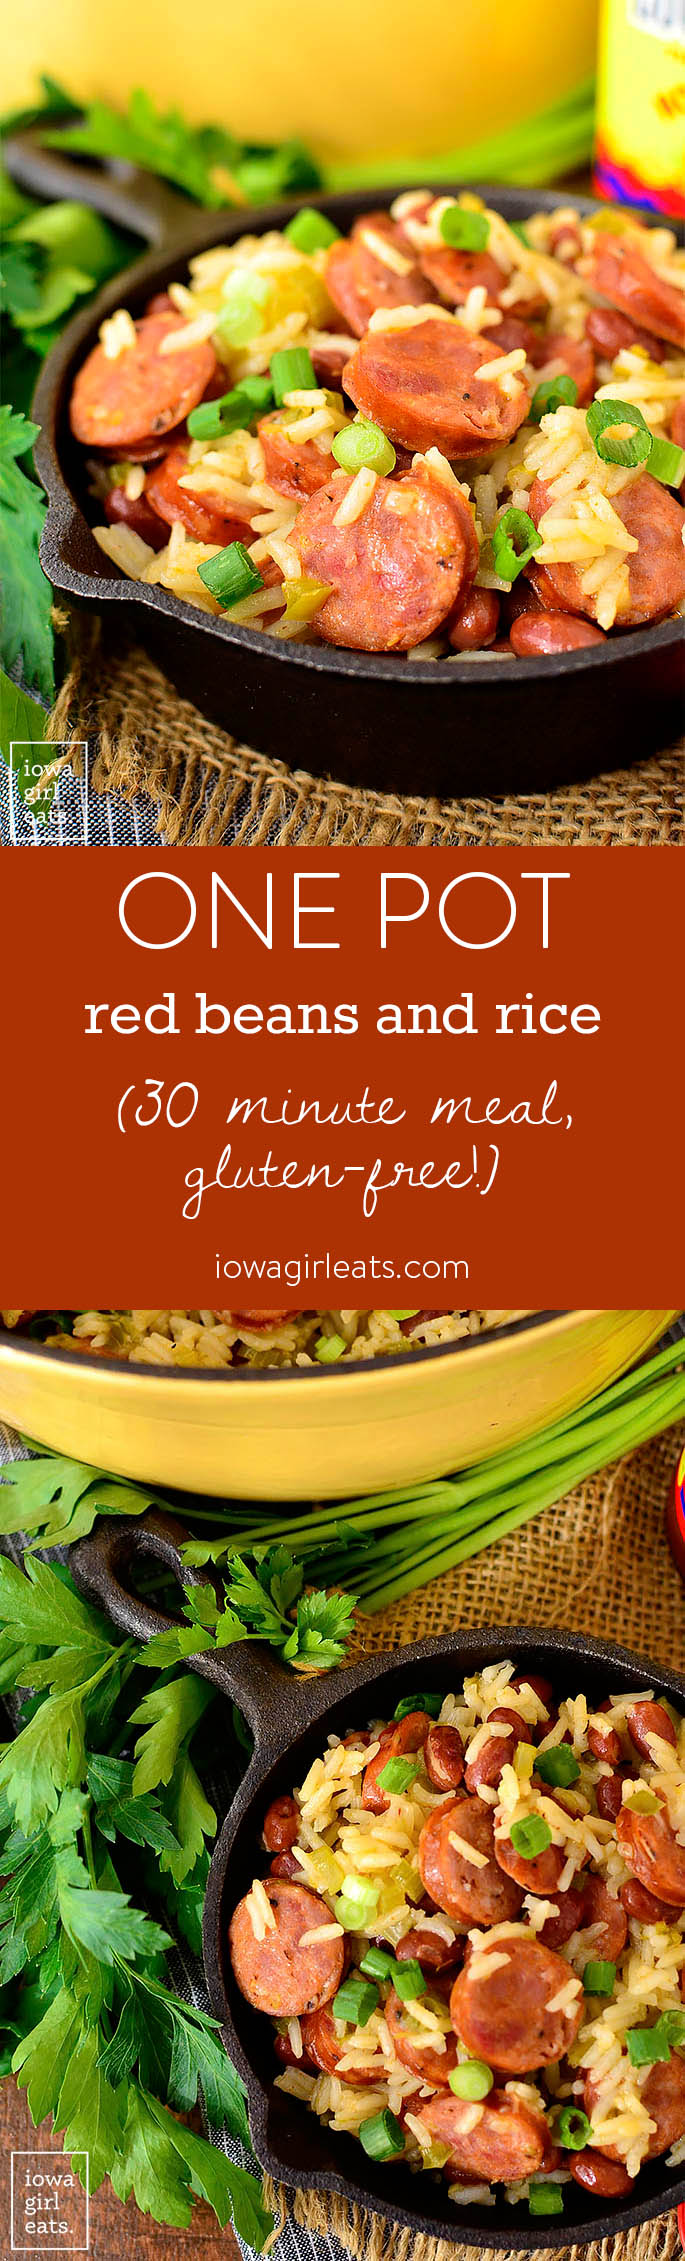 One Pot Red Beans and Rice is an easy and affordable one pot dish that the entire family will love. Get a taste of the south in under 30 minutes! | iowagirleats.com